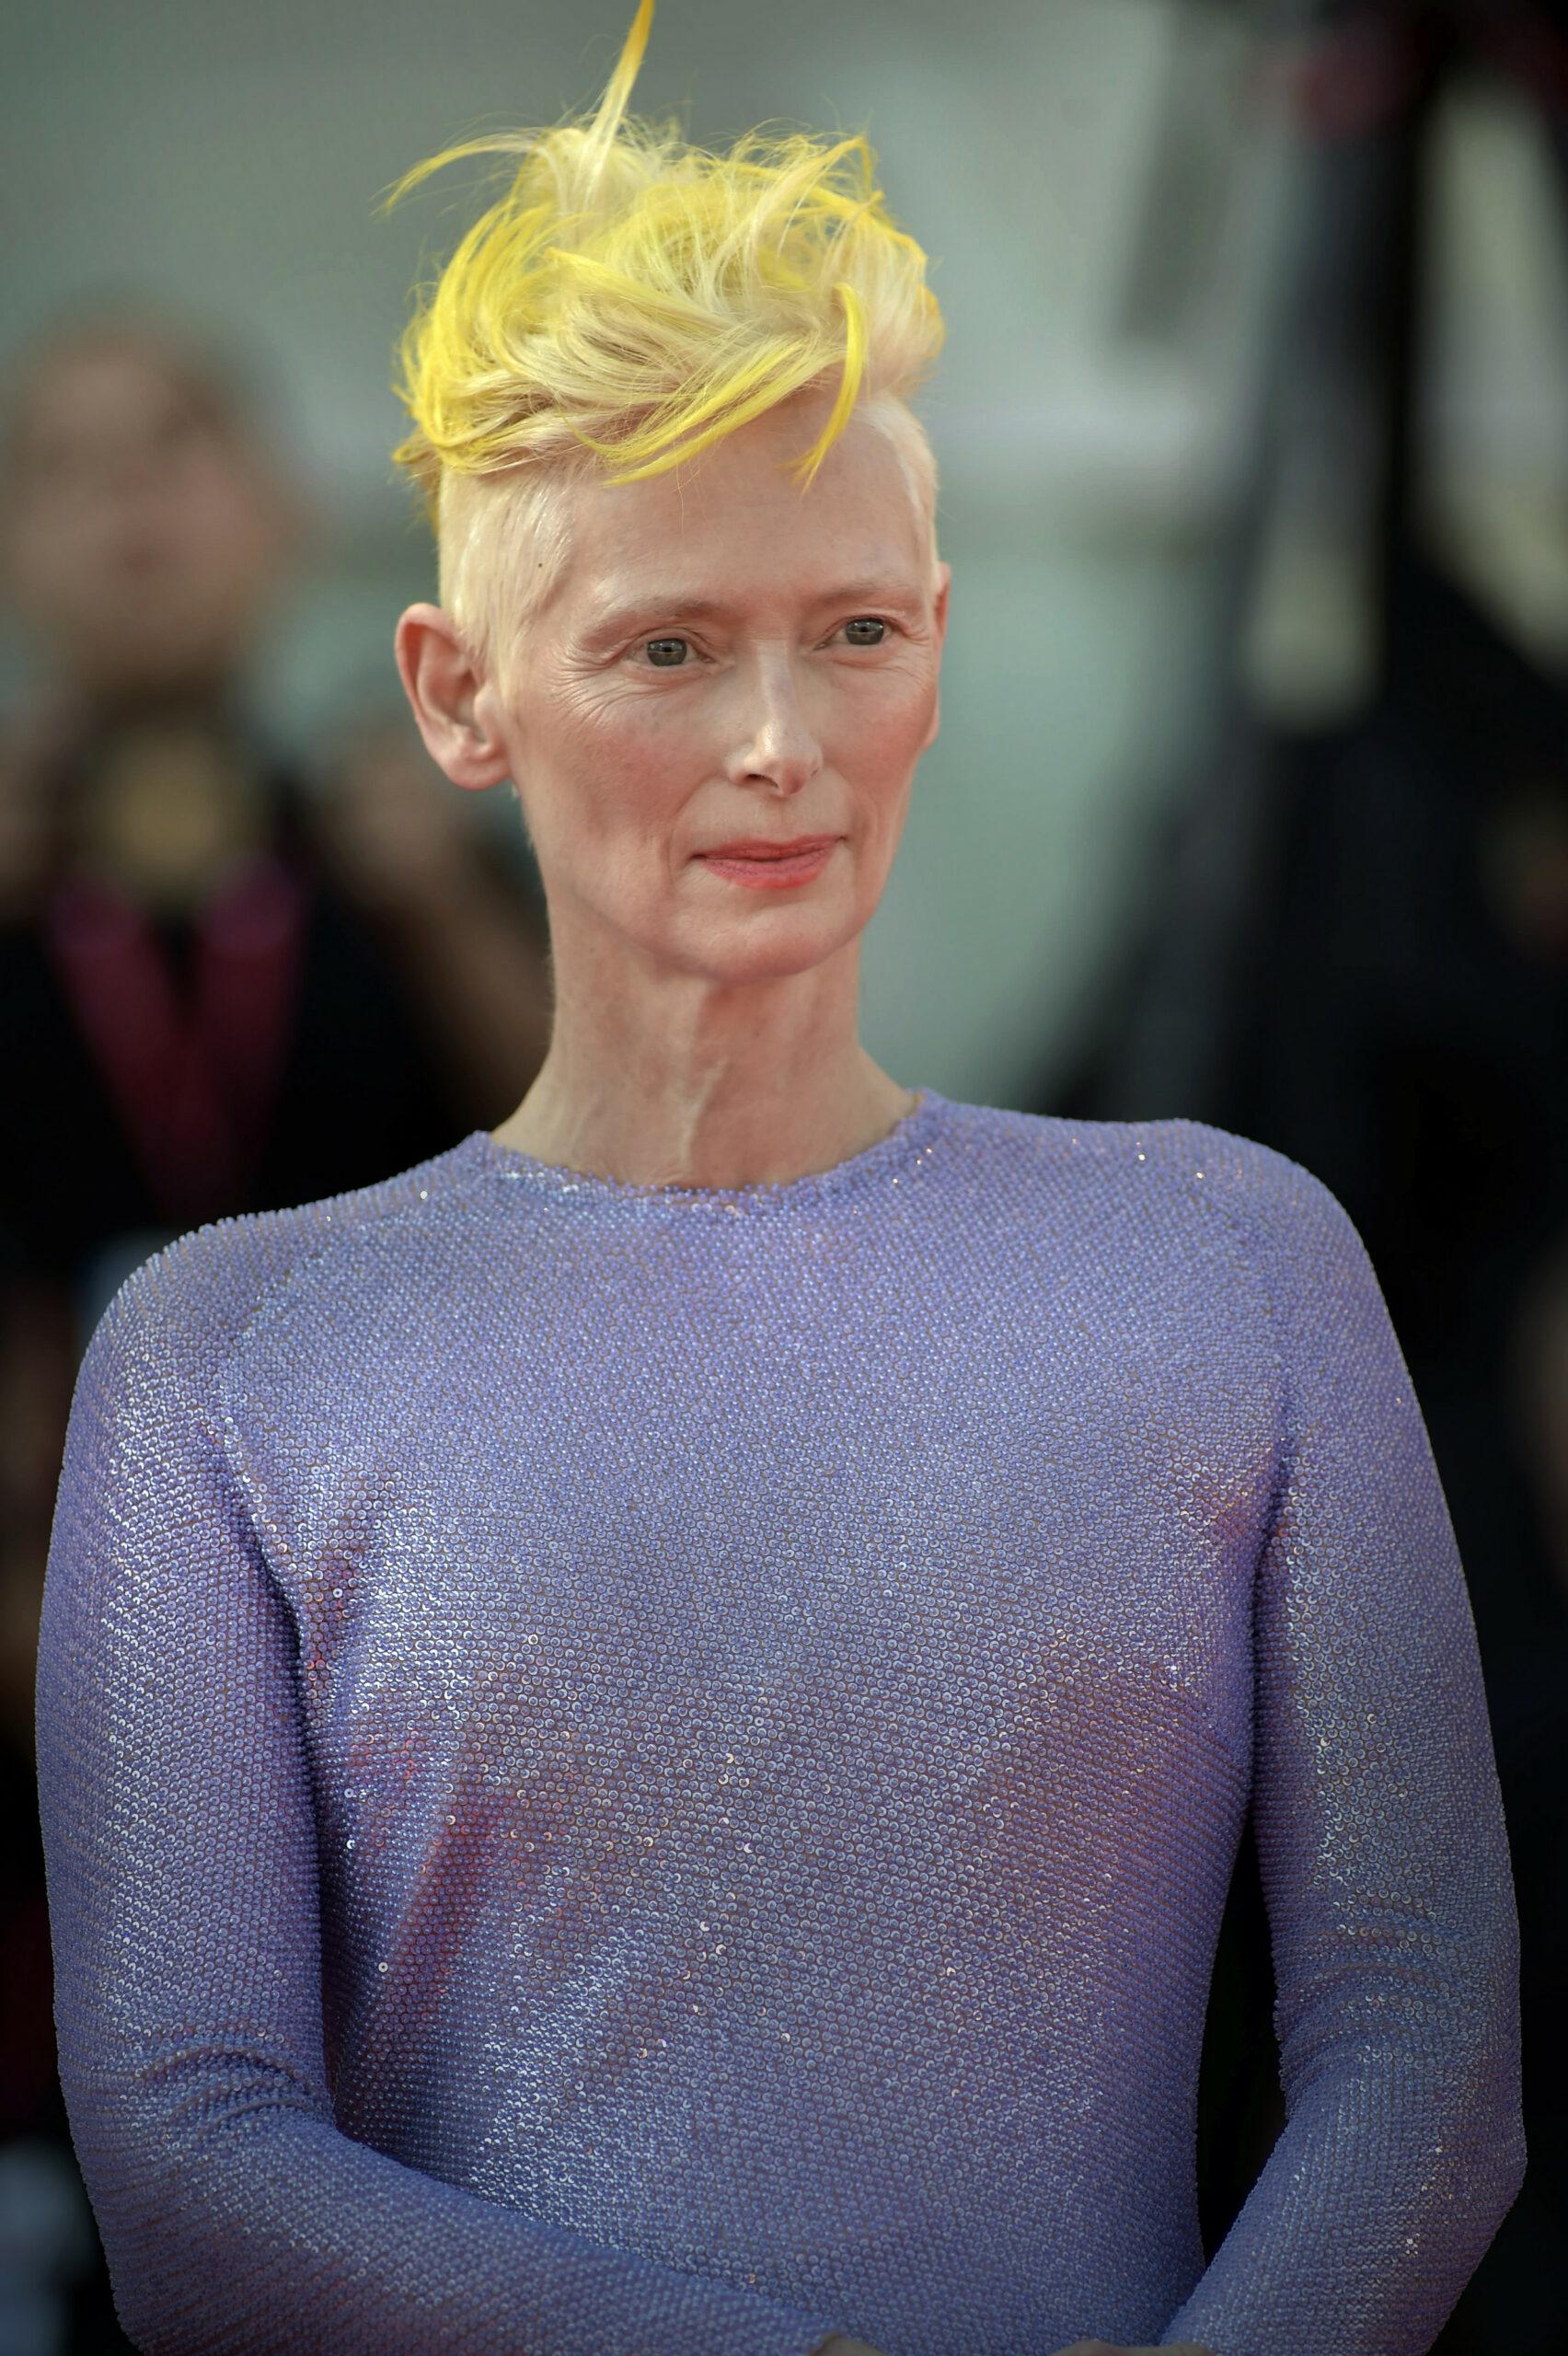 Tilda Swinton No Longer Interested in Observing COVID-19 Protocols On Movie Sets: 'I Have Faith'